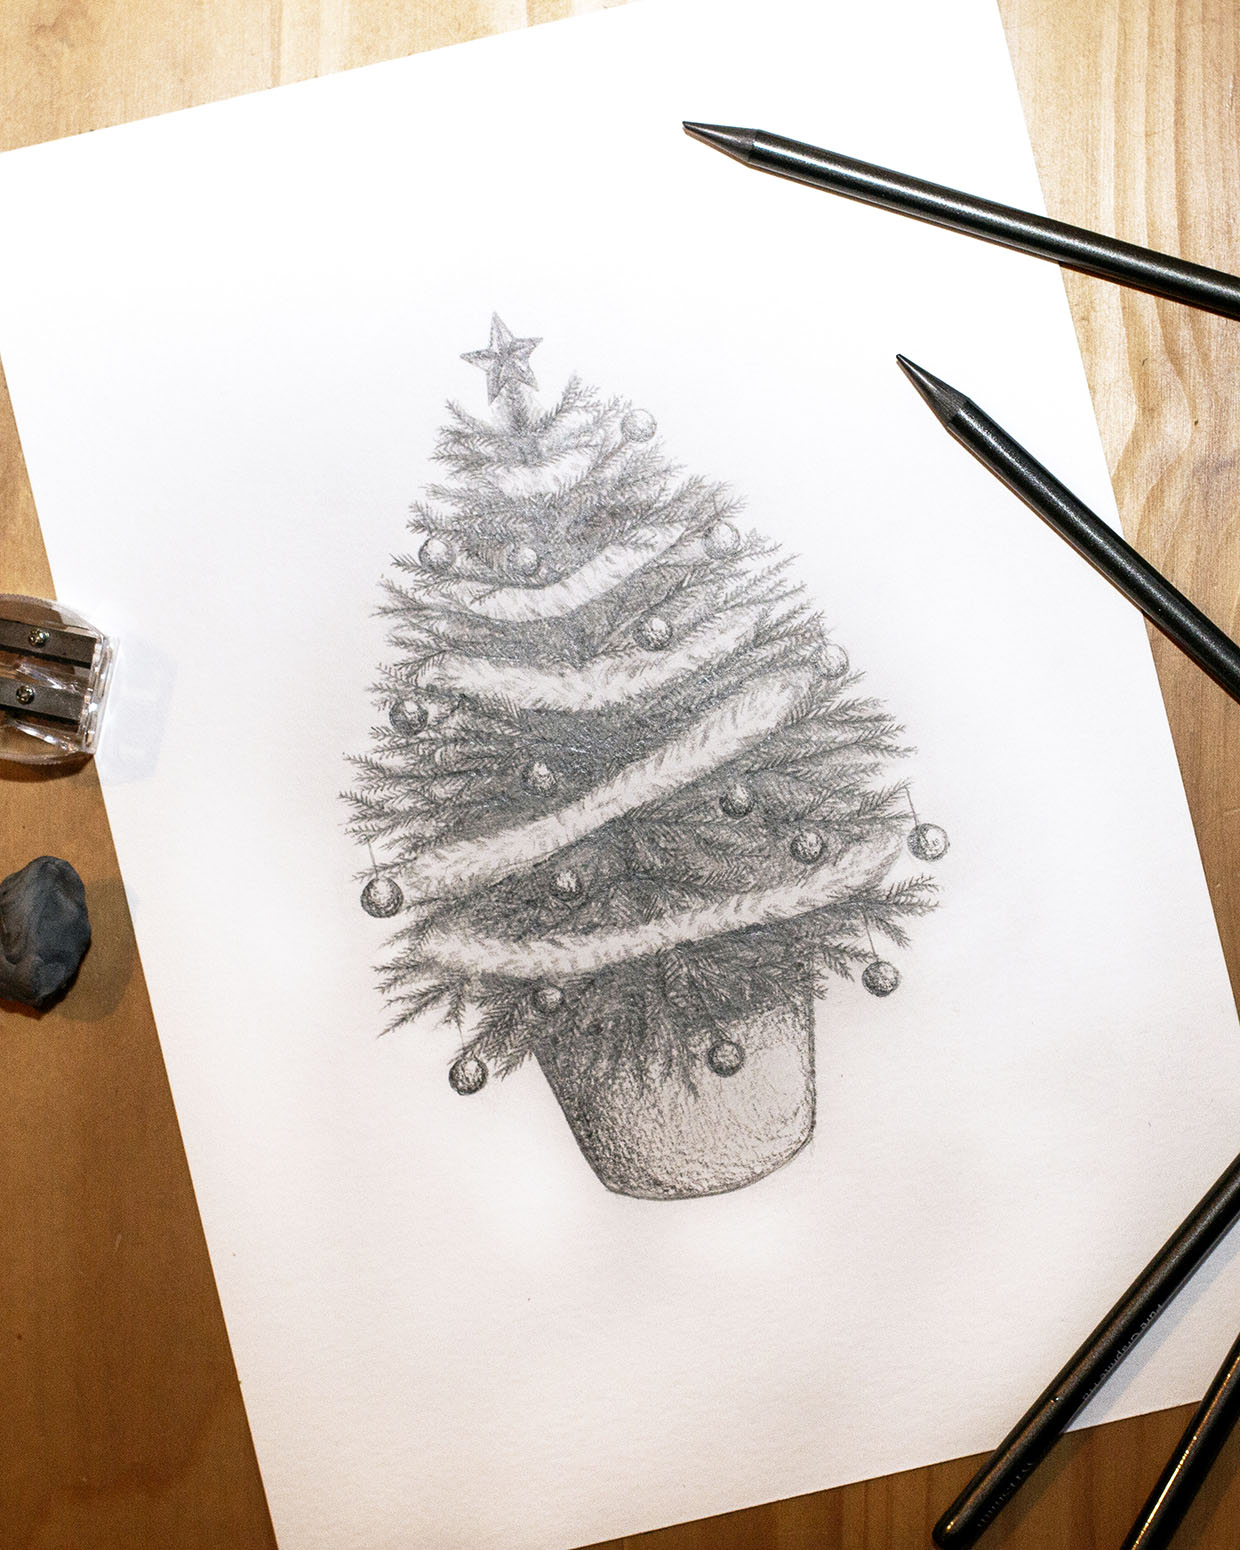 How To Draw Christmas Tree: Christmas Activity Book for Kids - a Fun  Illustrations to Practice & Learn Doodling & Drawing Skills .. Cute Xmas  Gift - Walmart.com